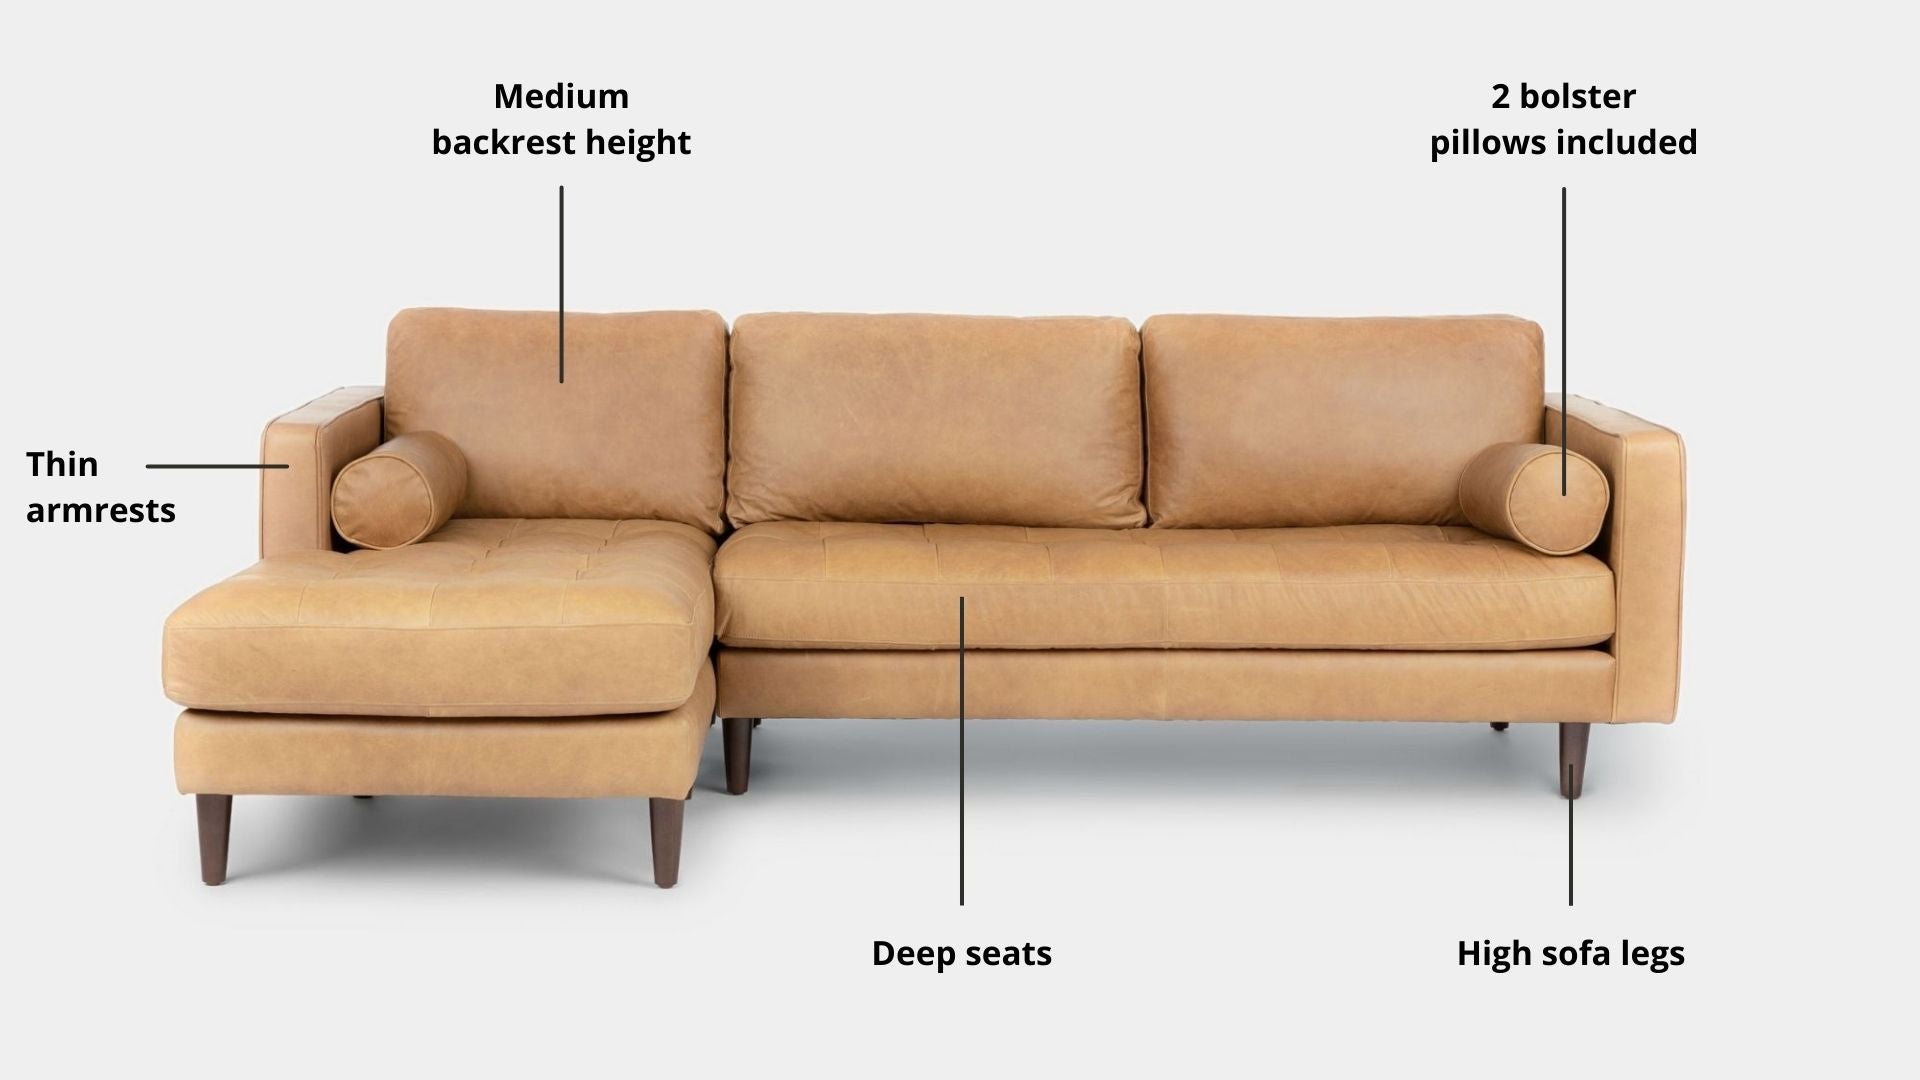 Key features such as armrest thickness, cushion height, seat depth and sofa leg height for Castle Full Leather Sectional Sofa